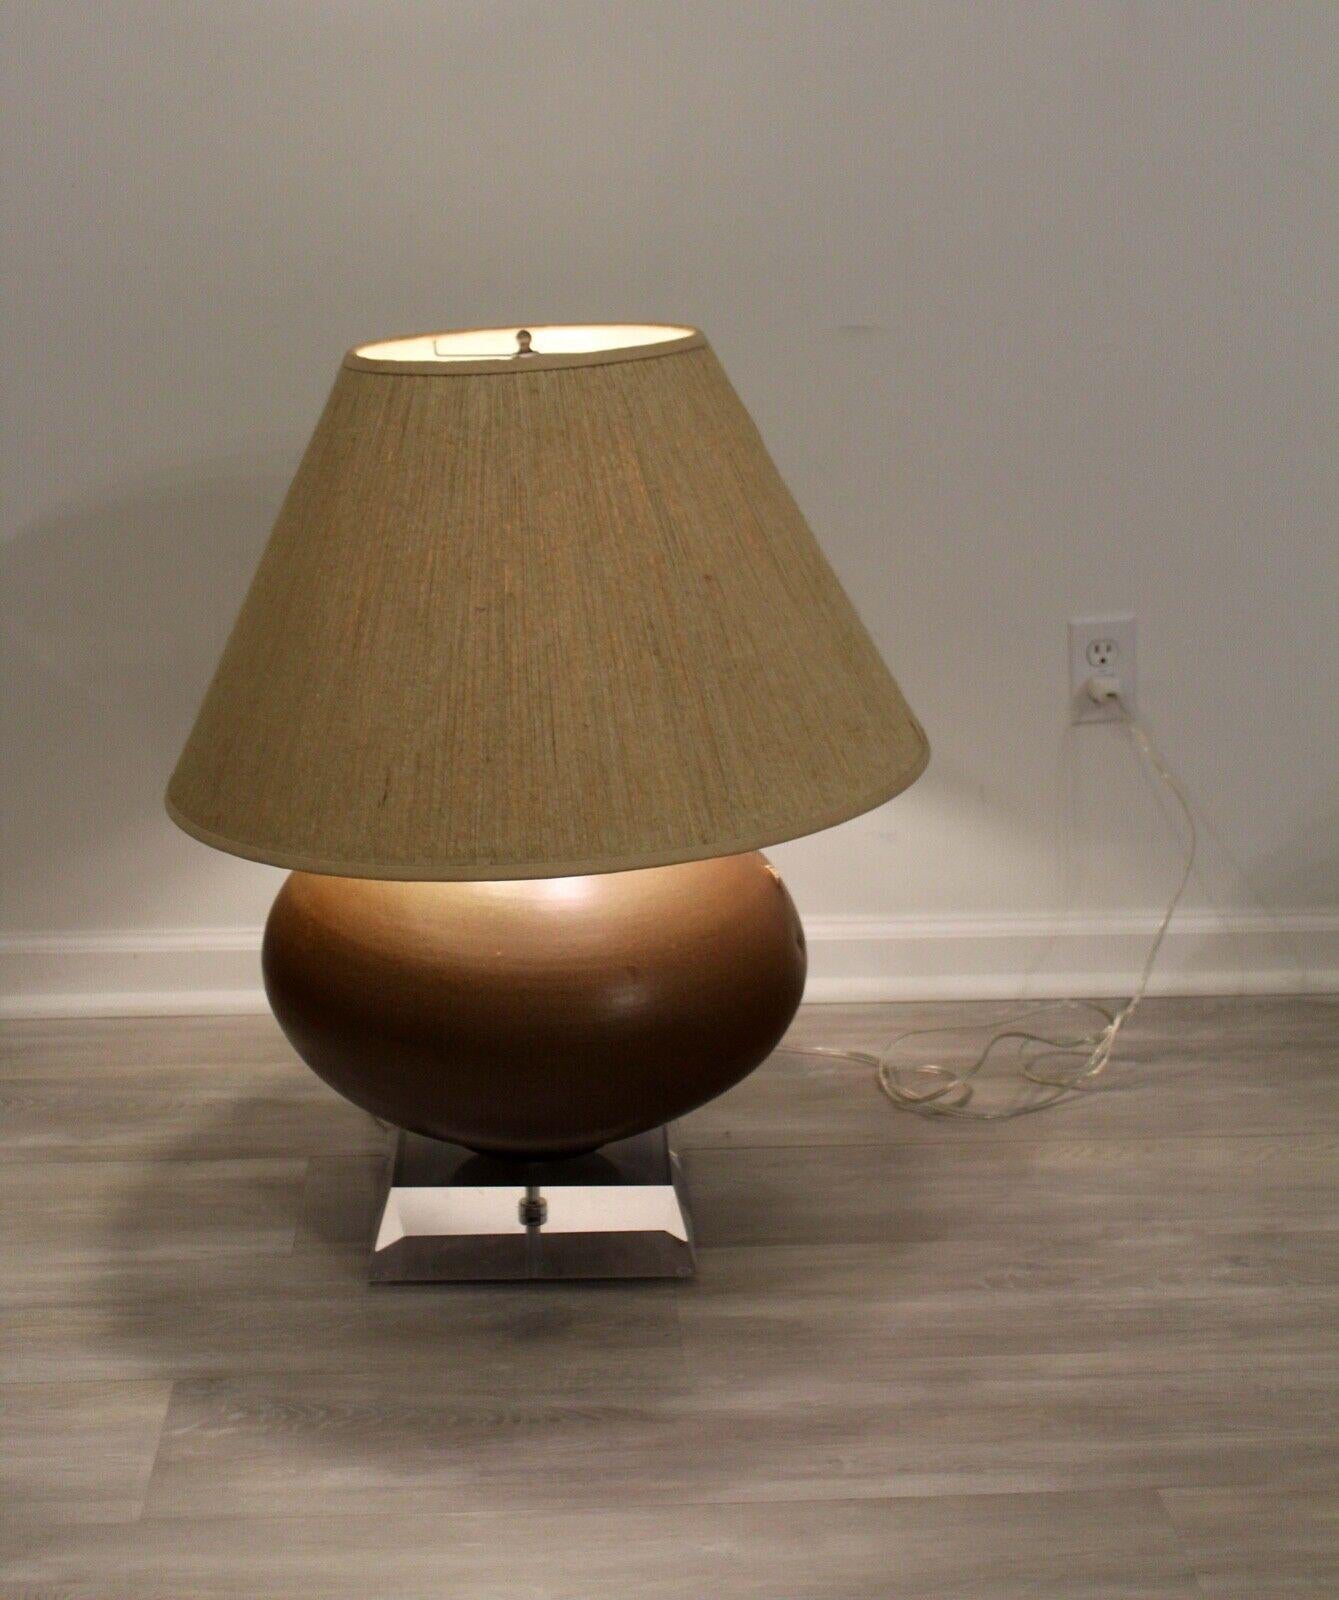 For your consideration is this vintage studio ceramic table lamp on thick lucite base. Dimensions: 25